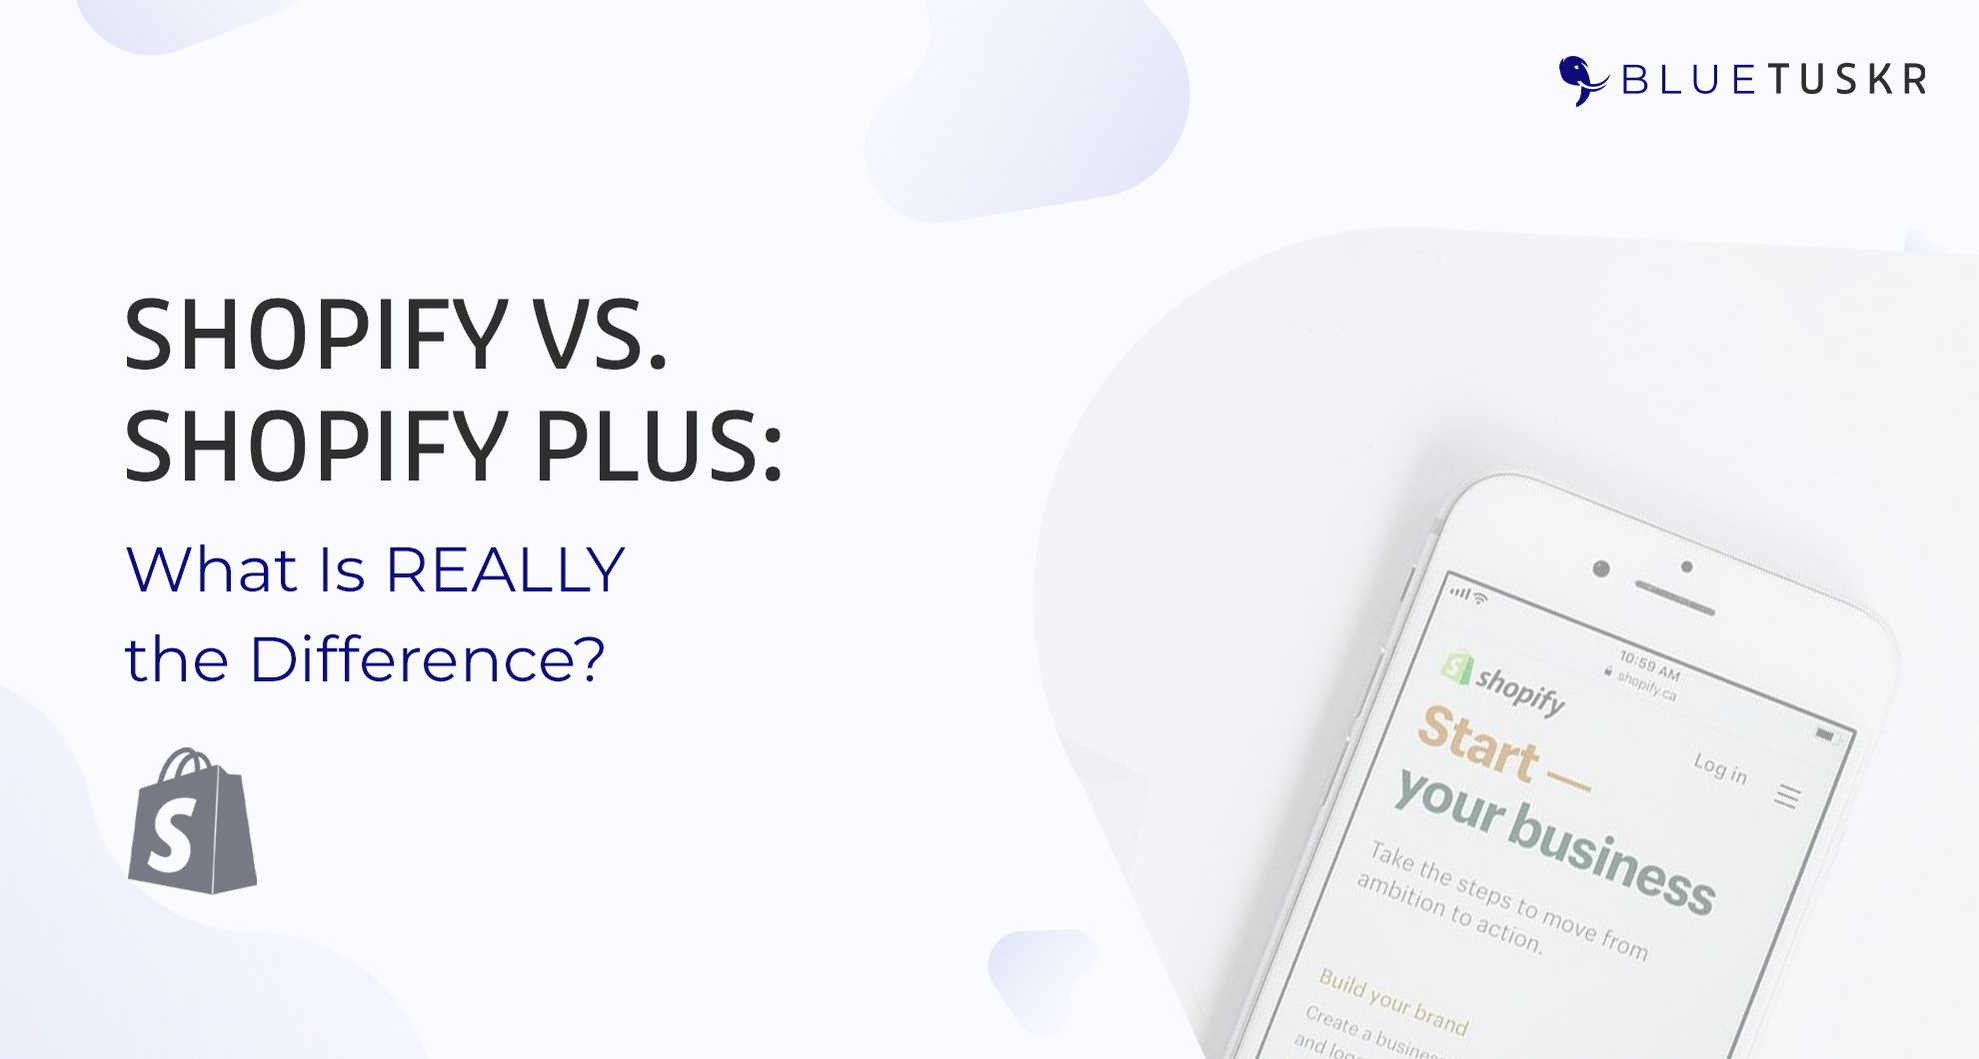 Shopify vs. Shopify Plus: What is the Difference?